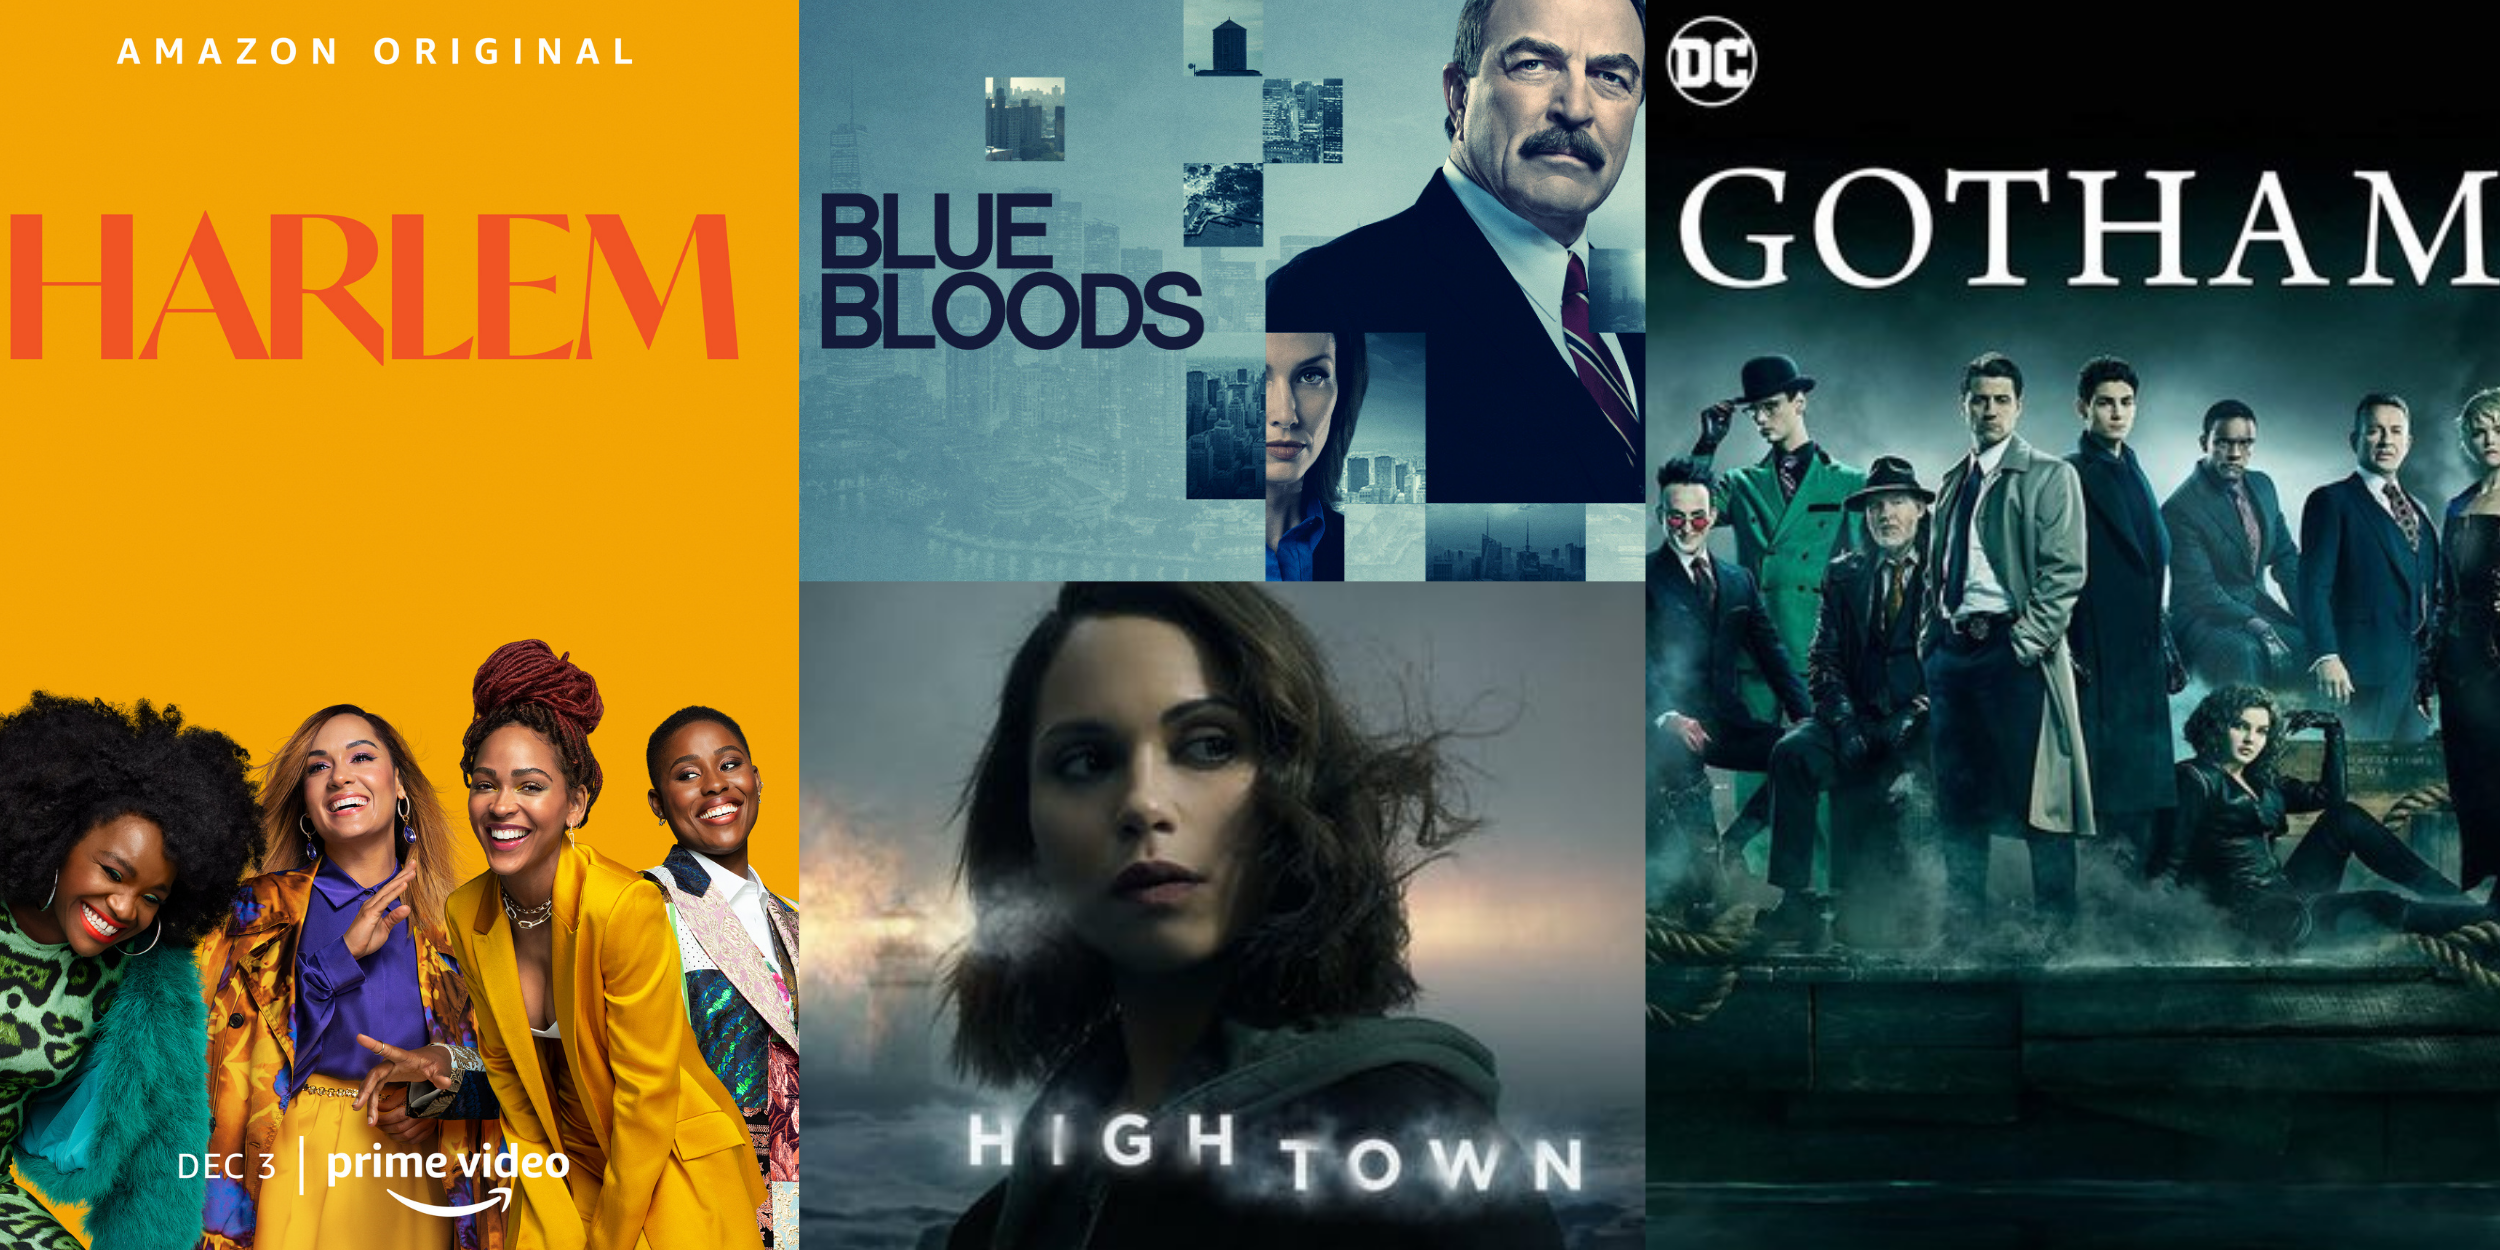 Posters for TV shows Harlem, Blue Bloods, Hightown, and Gotham, cast by Josy Rodriguez